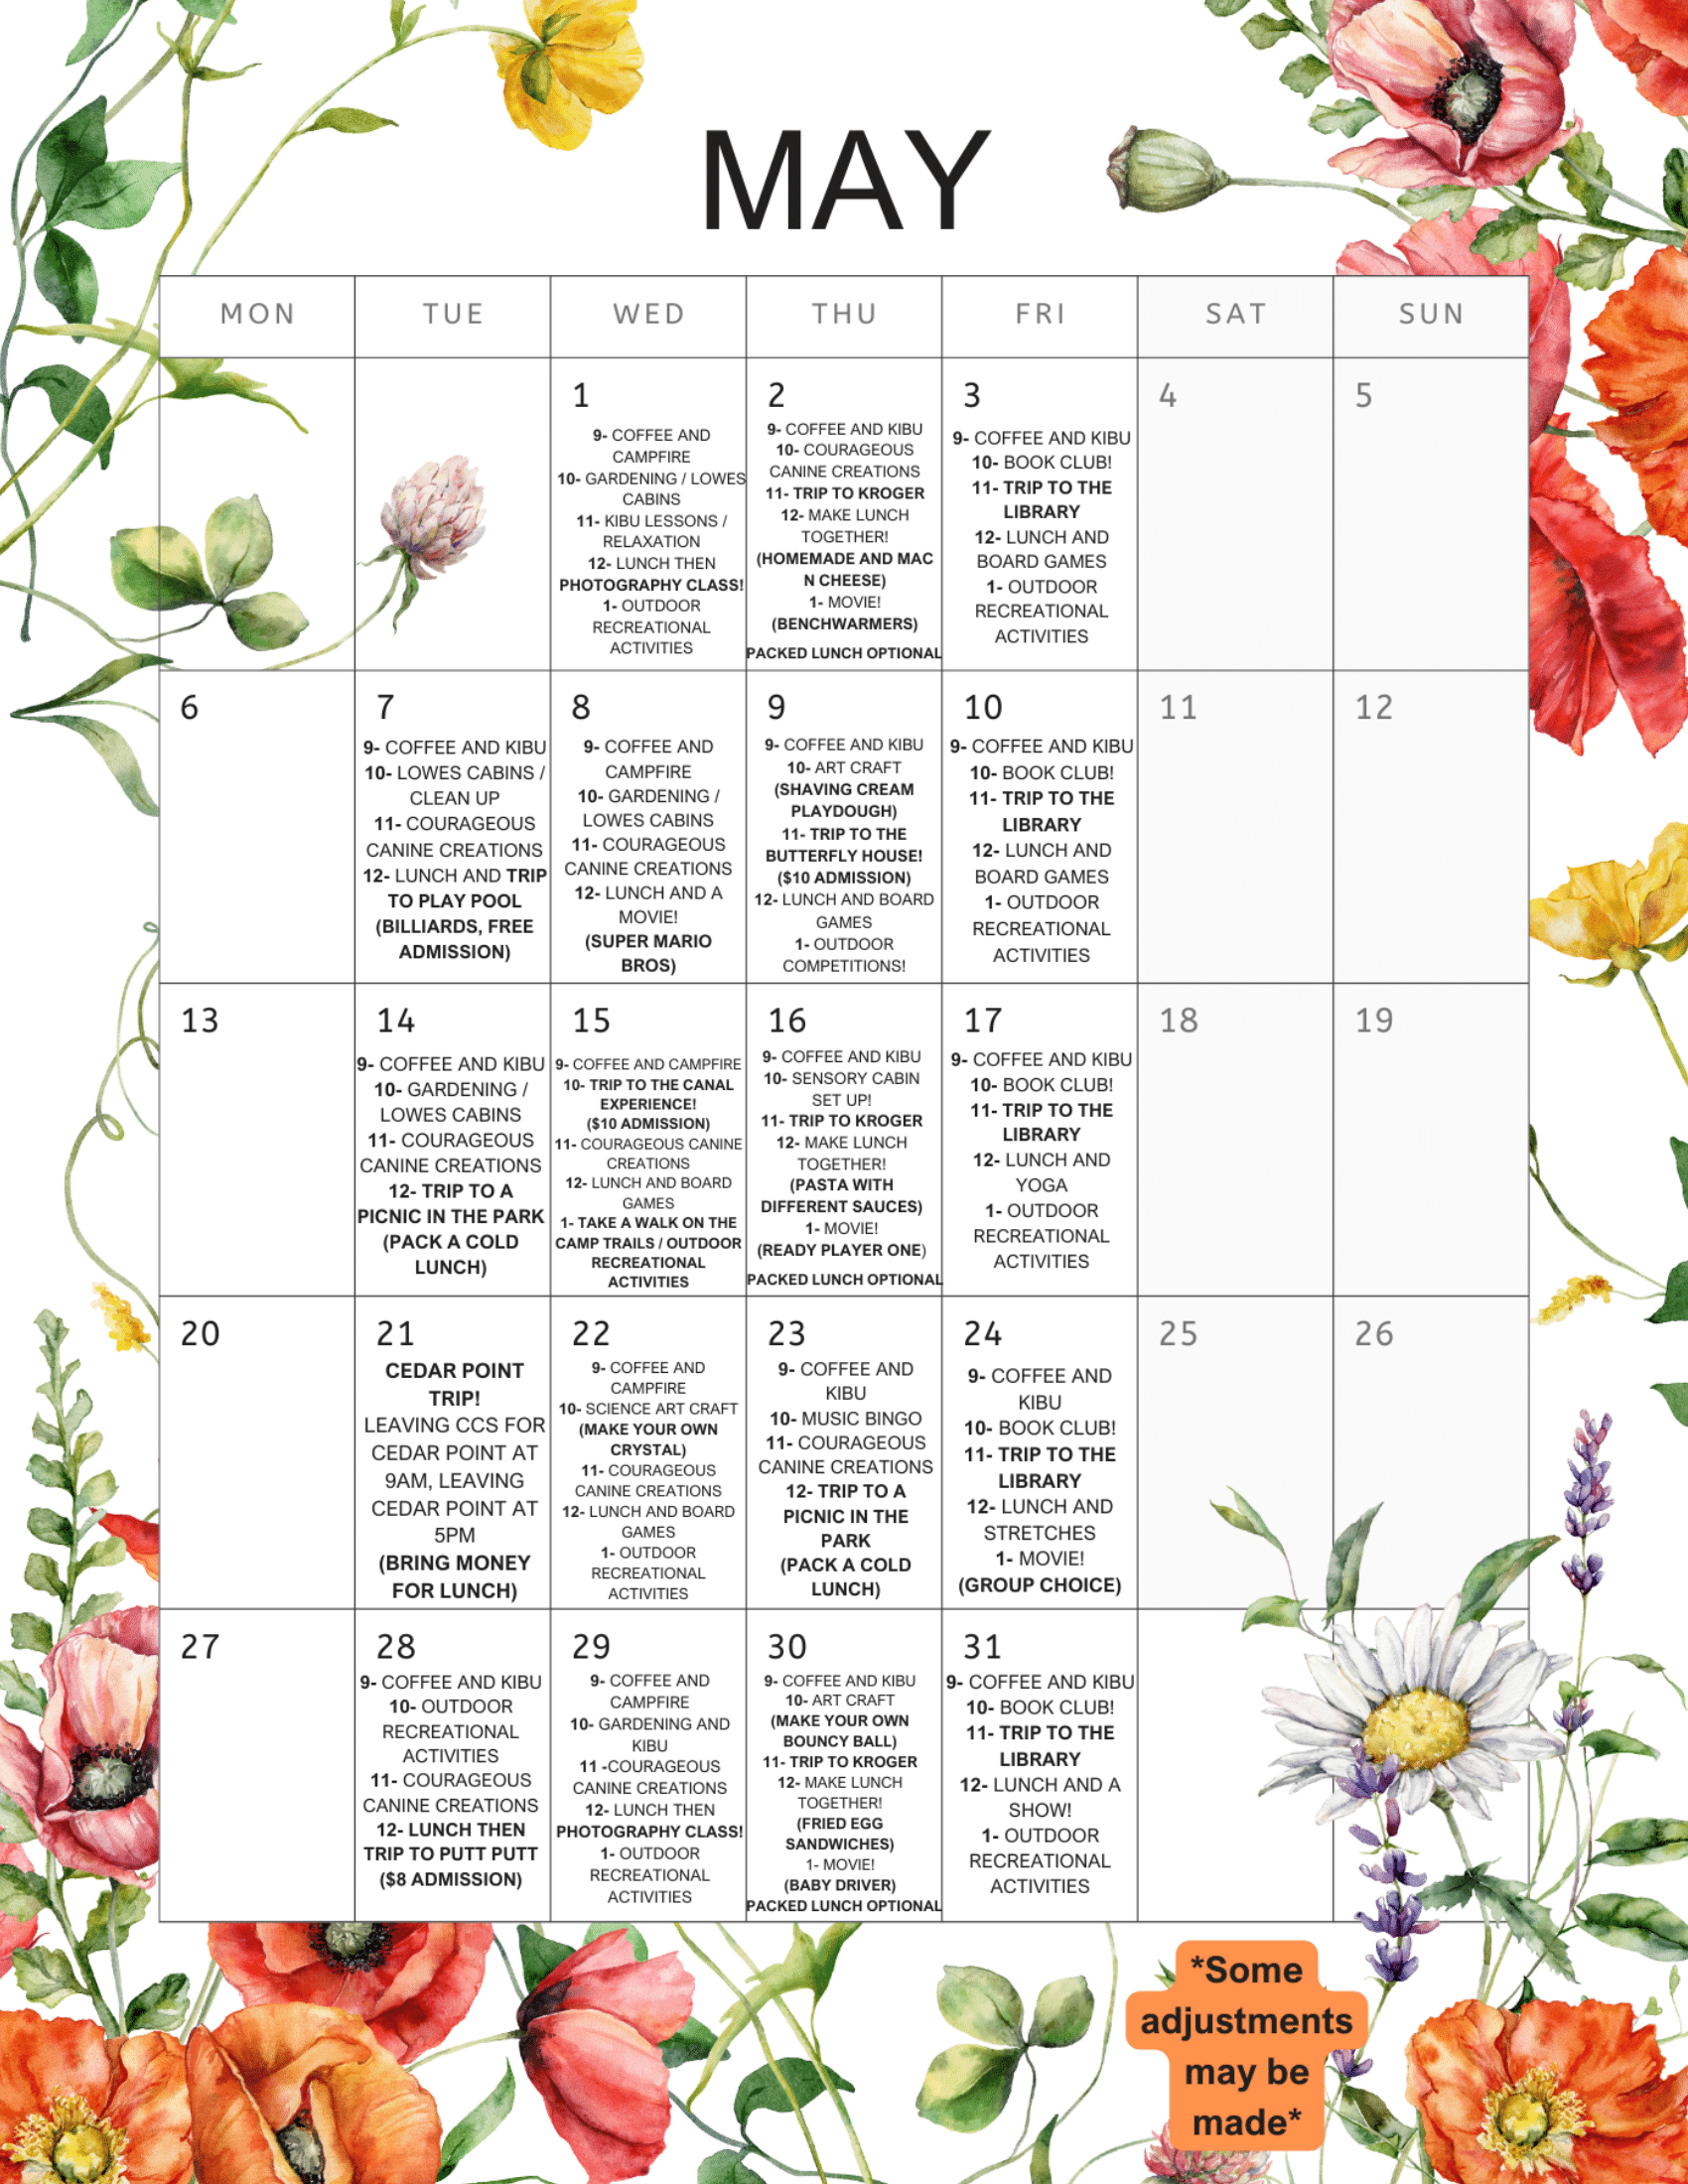 The May Courageous Connections calendar. It has flowers on it.